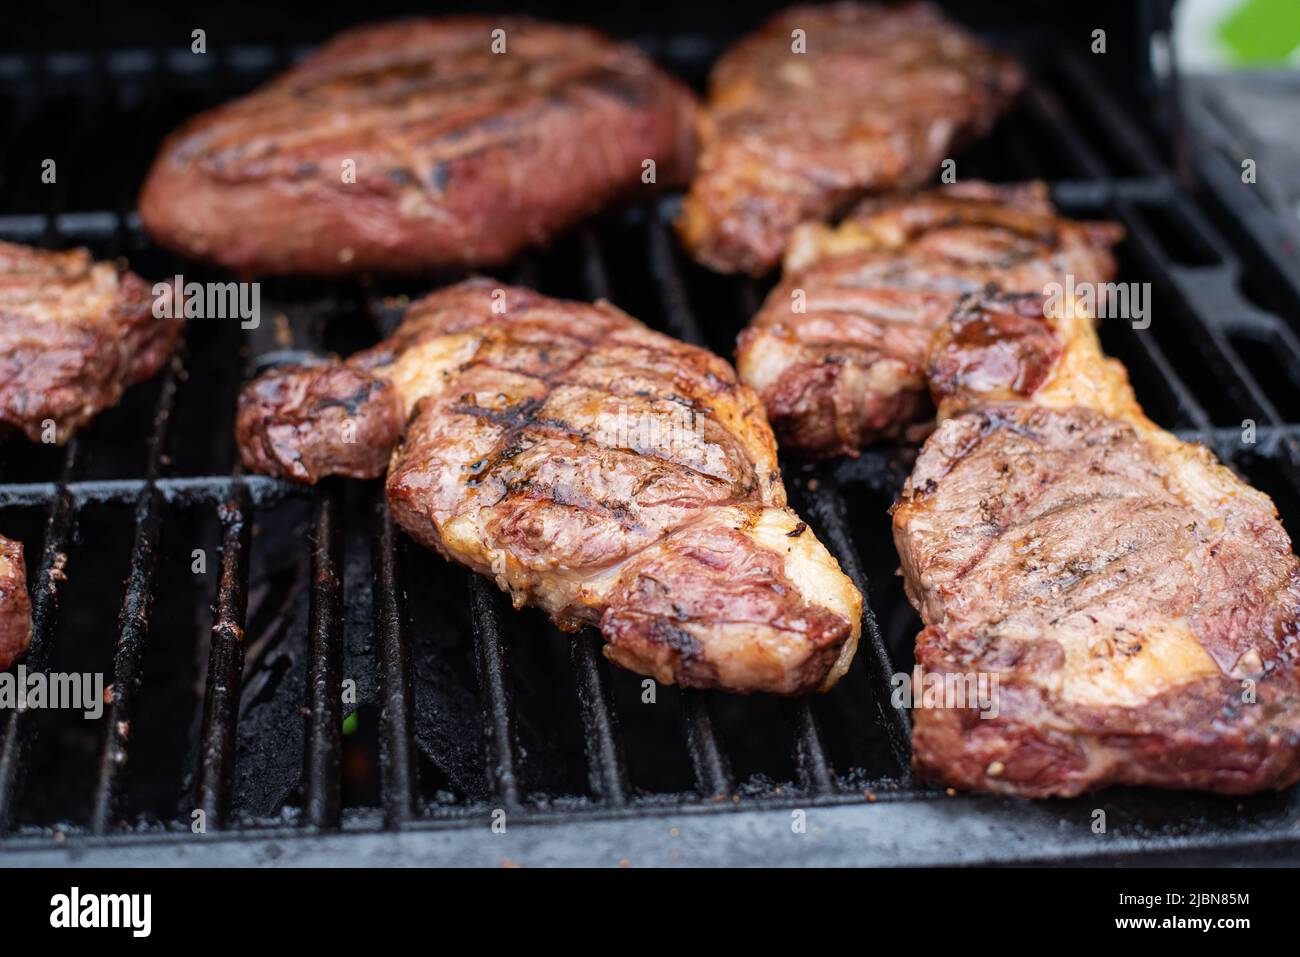 Steaks cooking on a grill. Stock Photo